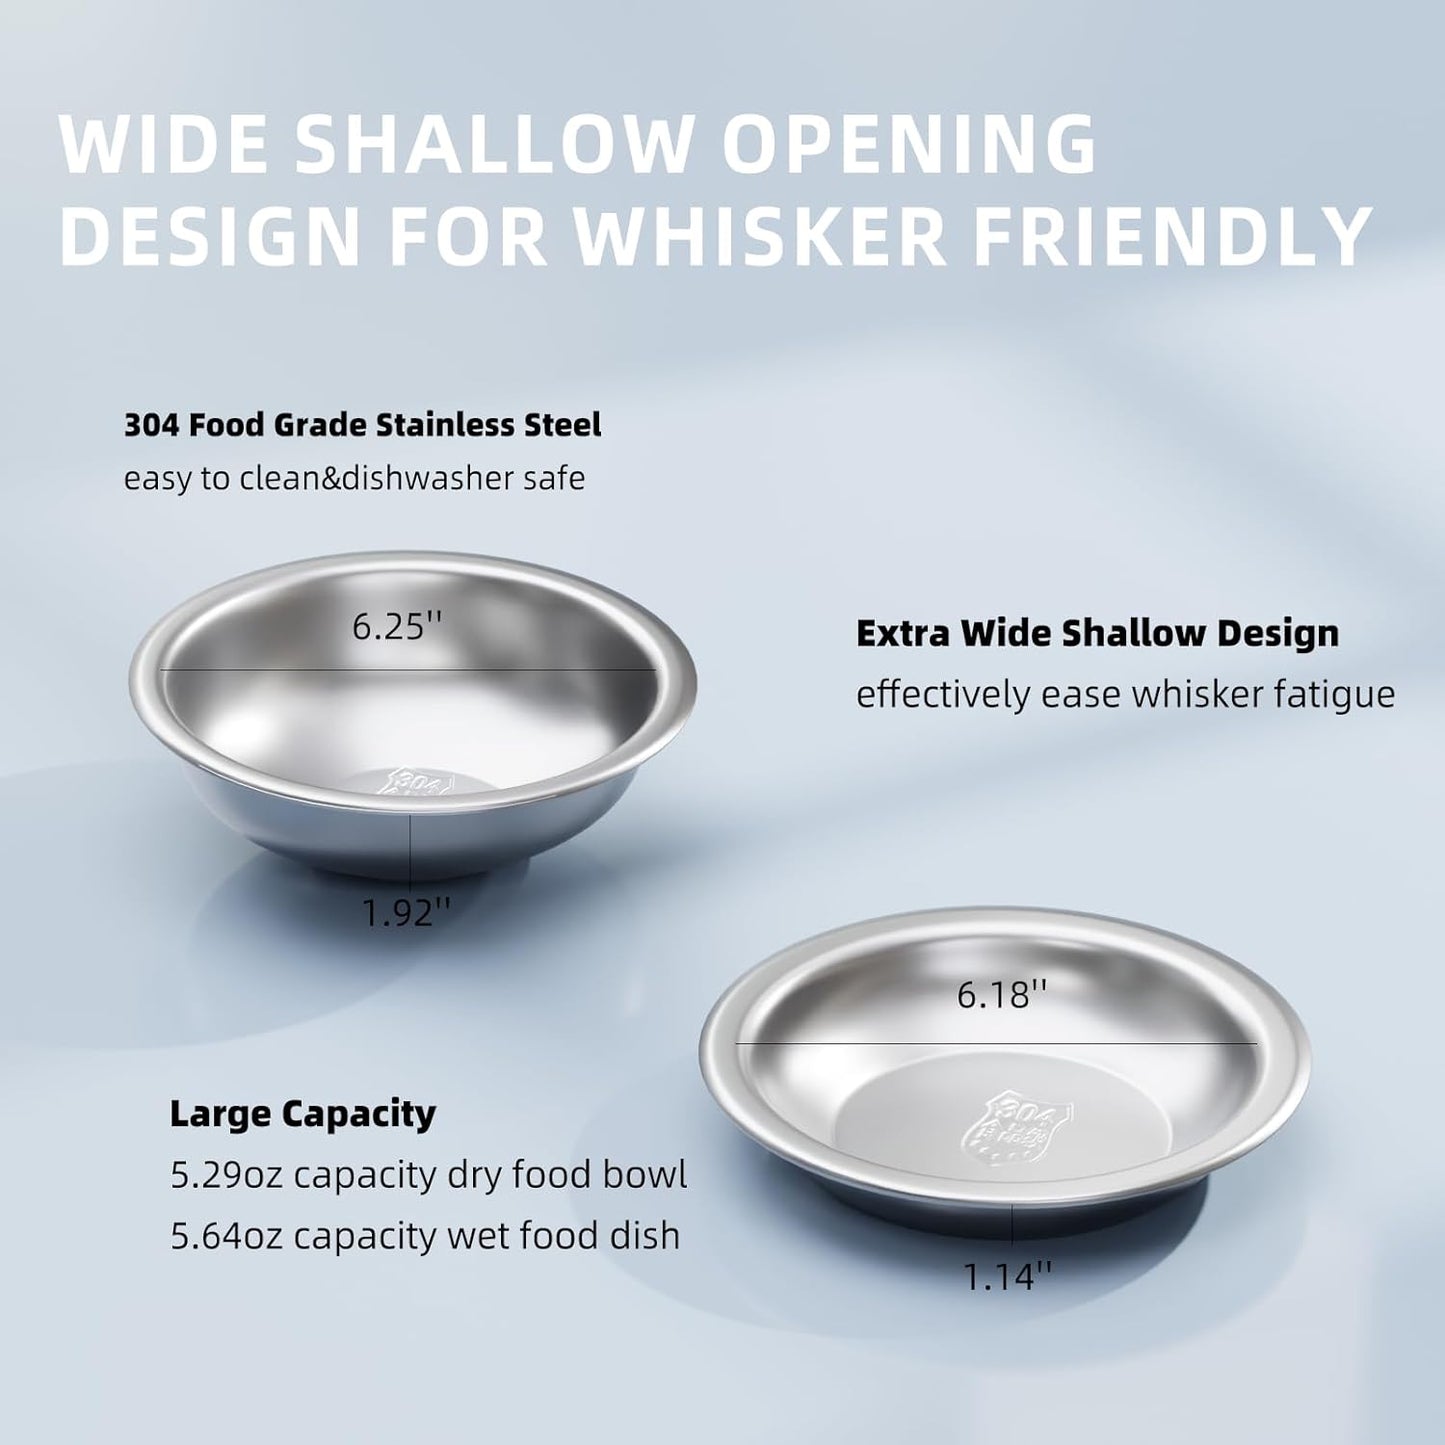 Cat Bowls Elevated Tilted Whisker Friendly, Cat Food Bowls for Indoor Cats, Shallow Cat Food Dishes Stainless Steel, Slanted Flat Plastic Feeder Elevated Angled Design.(White)